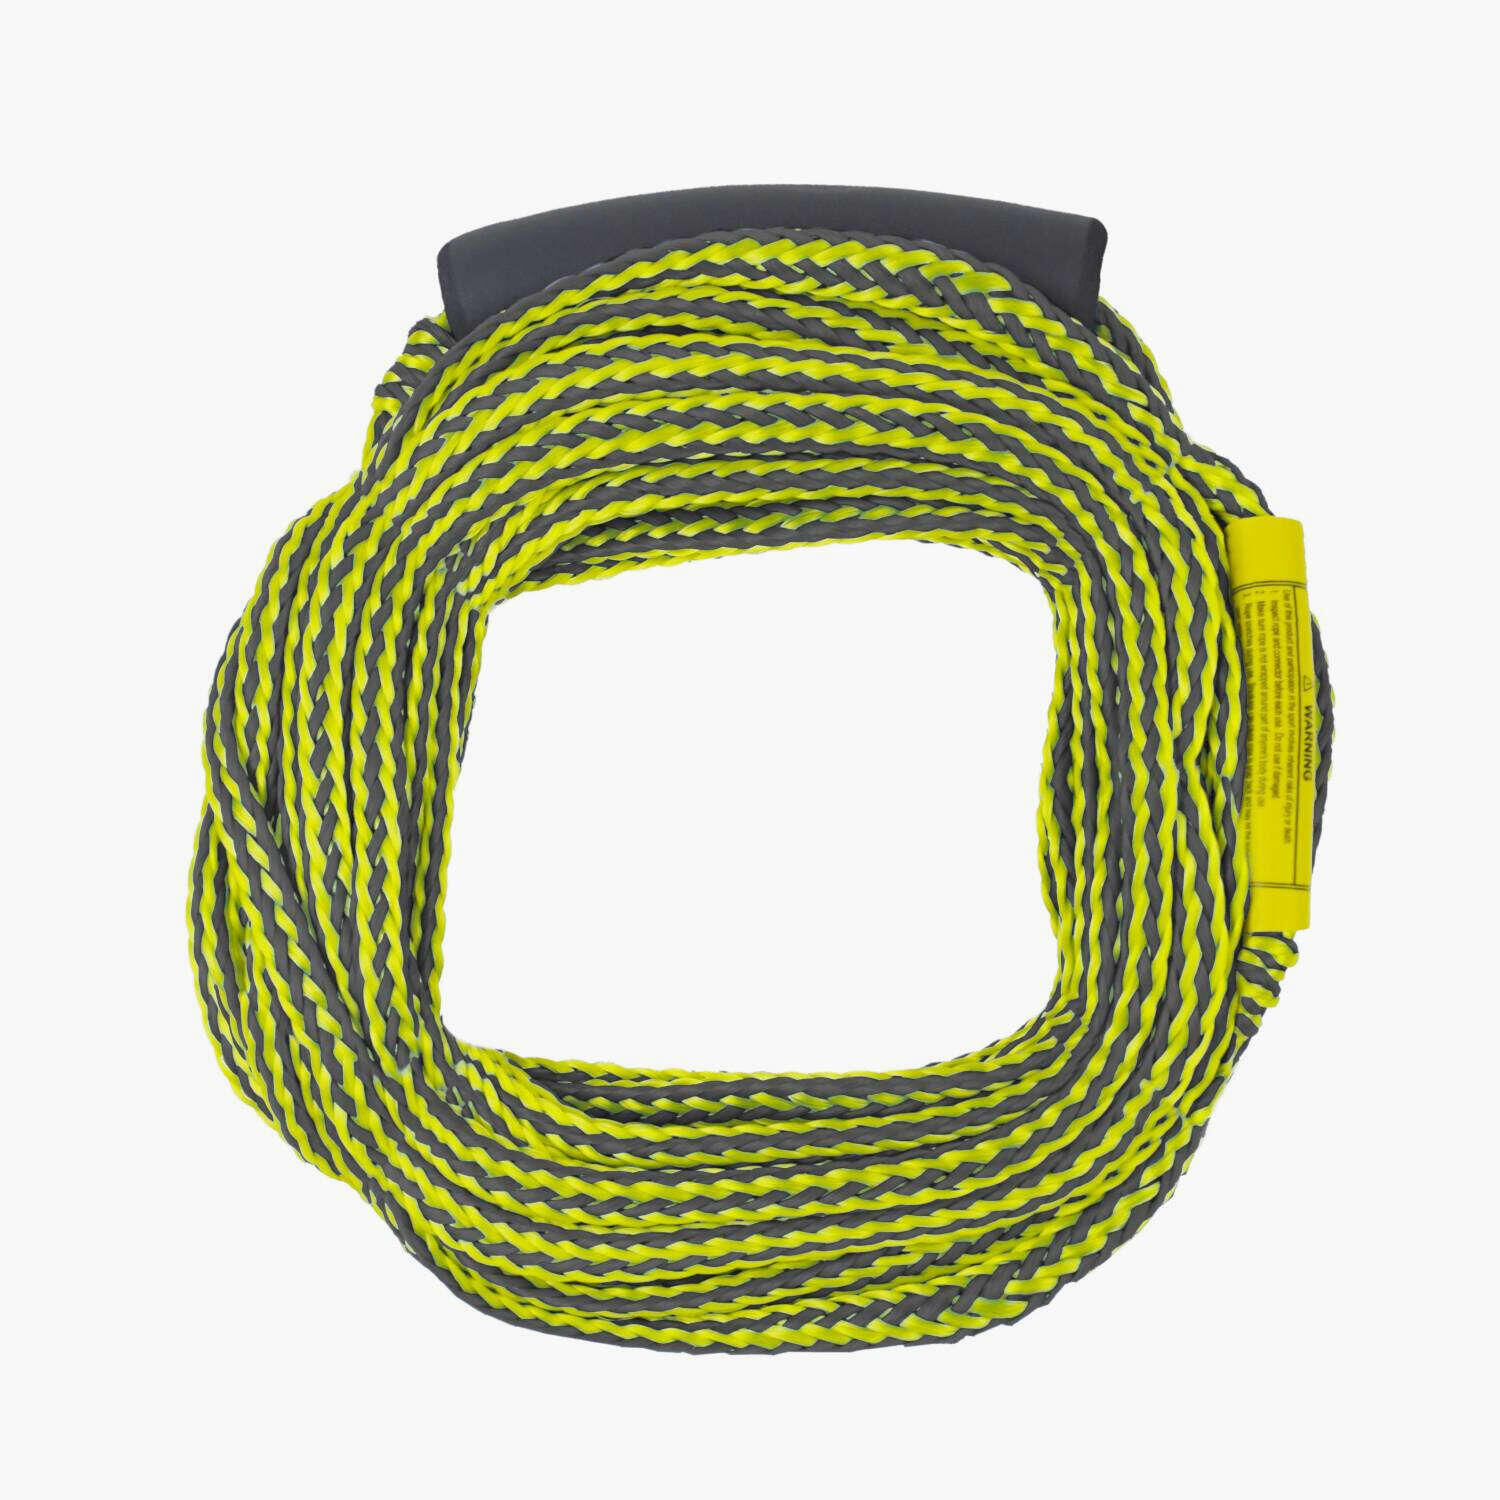 10mm Floating Rope - Braided Polypropylene  Lomo Watersport UK. Wetsuits,  Dry Bags & Outdoor Gear.